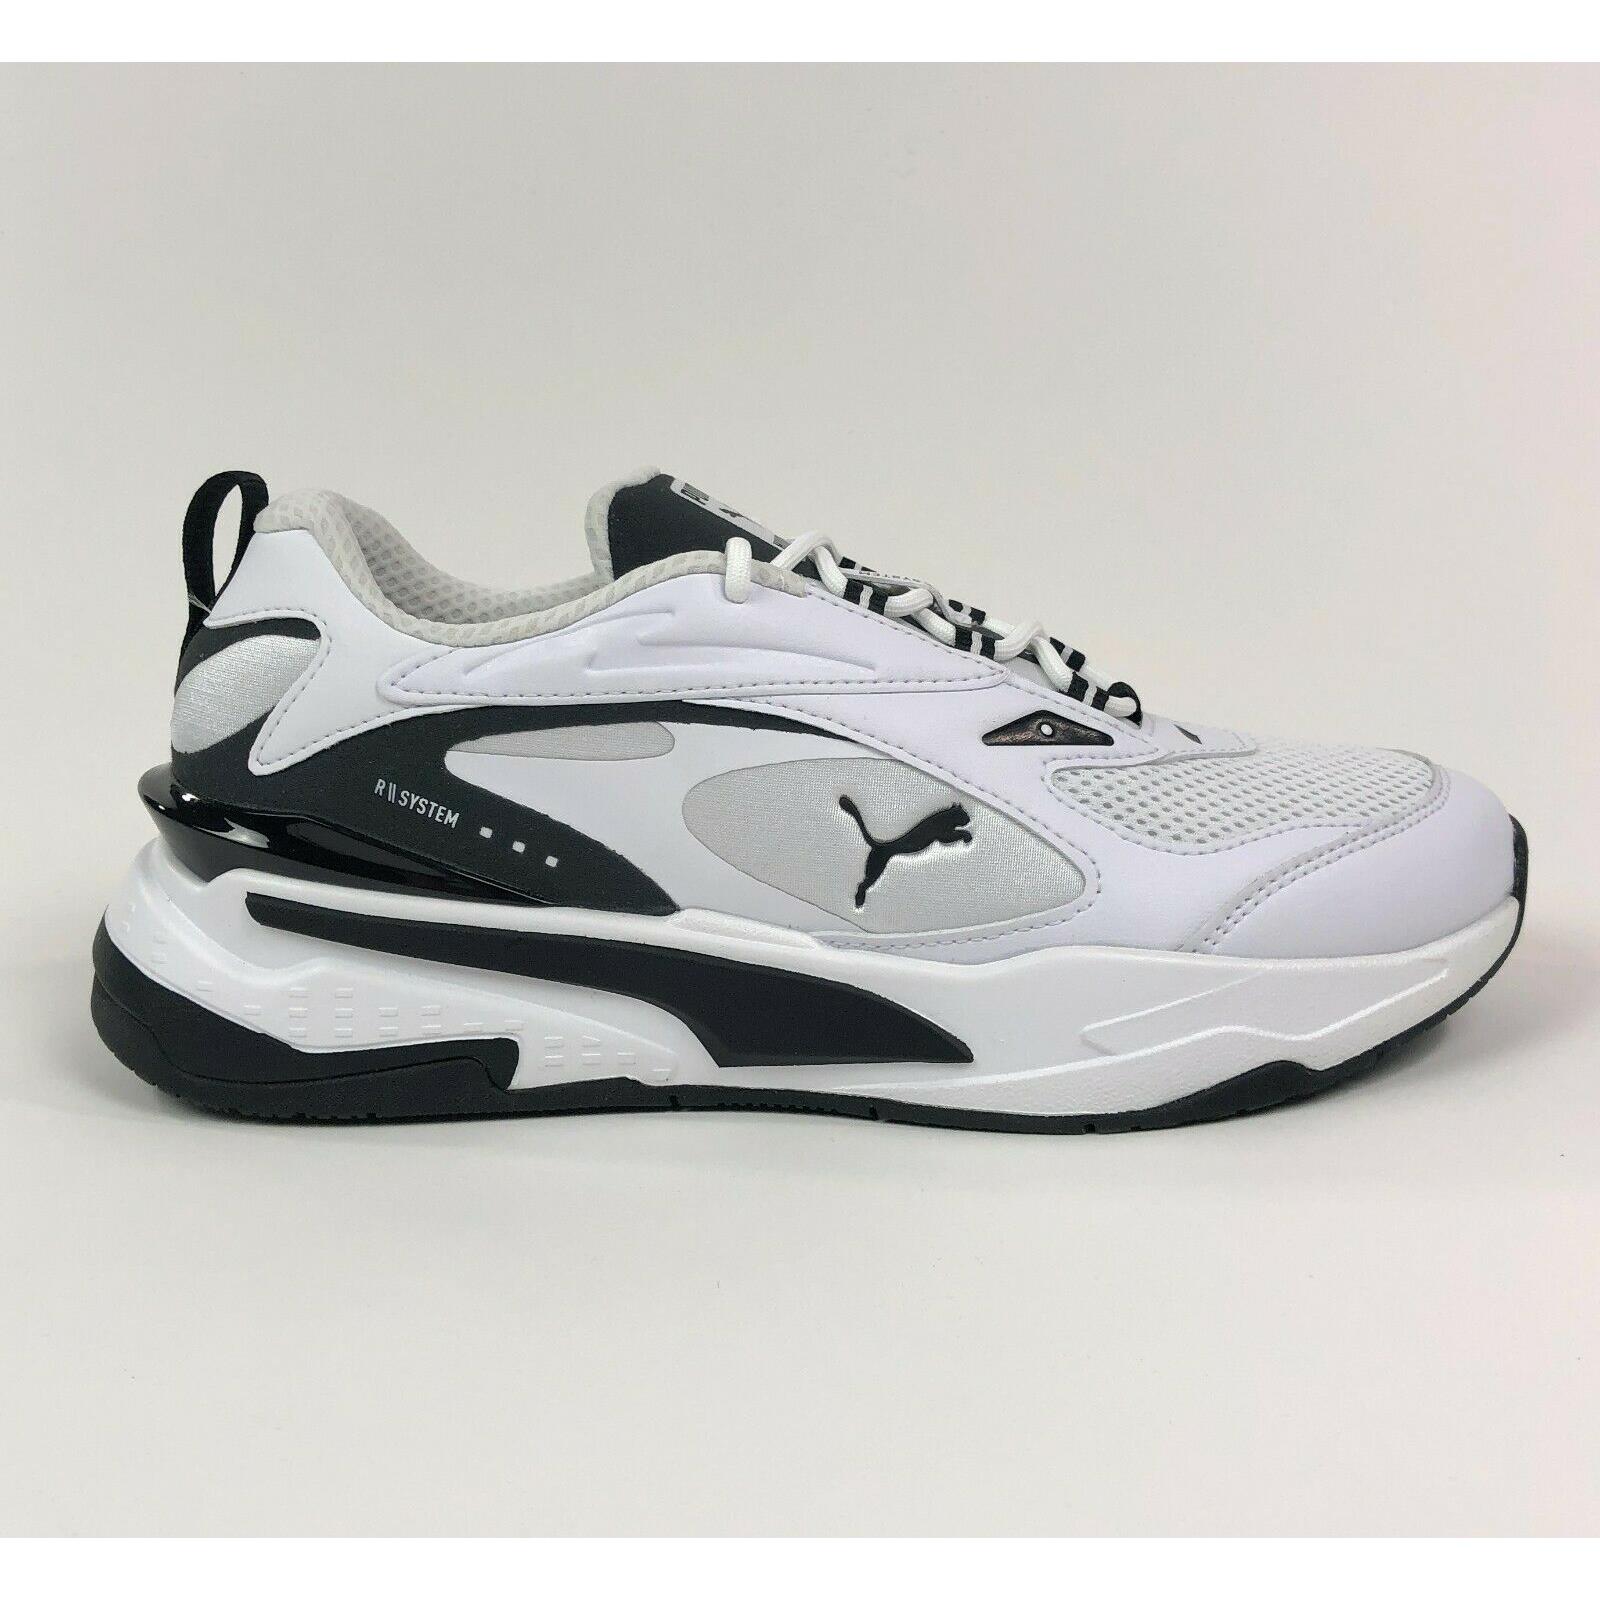 Puma Rs-fast Shoes Sneakers Mens 9.5 White Black Low Athletic Casual 380562-03